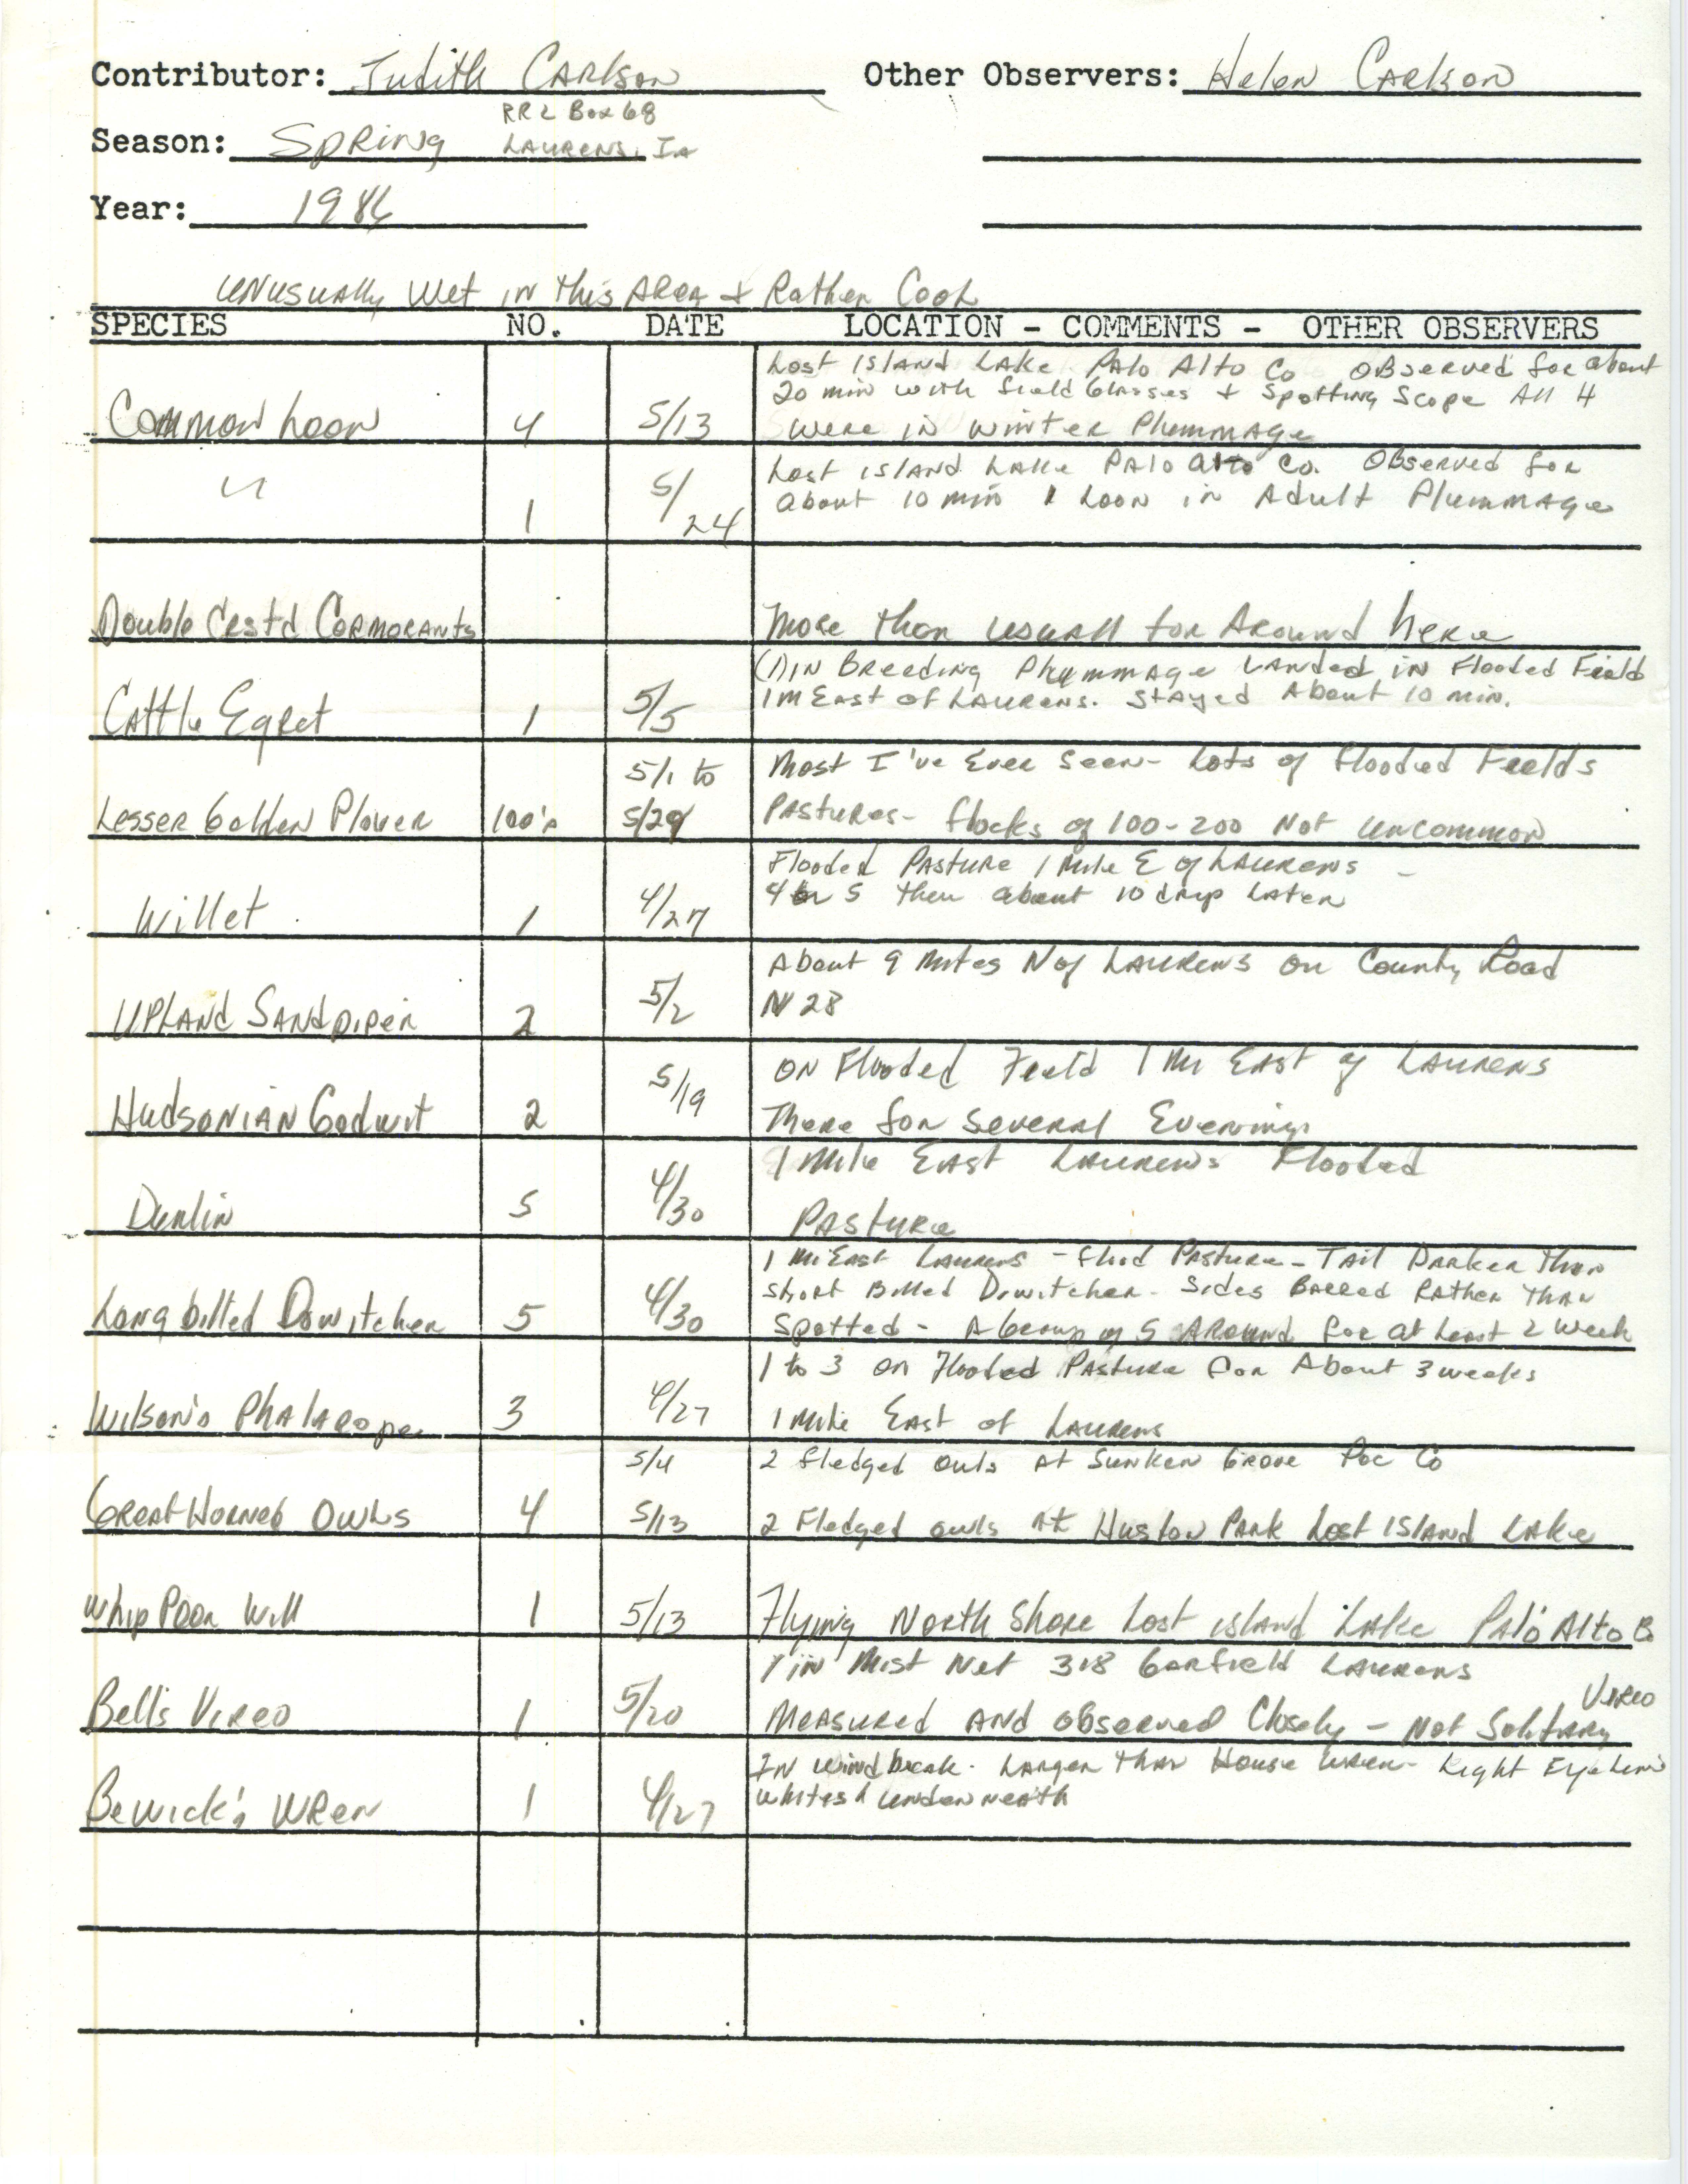 Annotated bird sighting list for Spring 1986 compiled by Judith Carlson